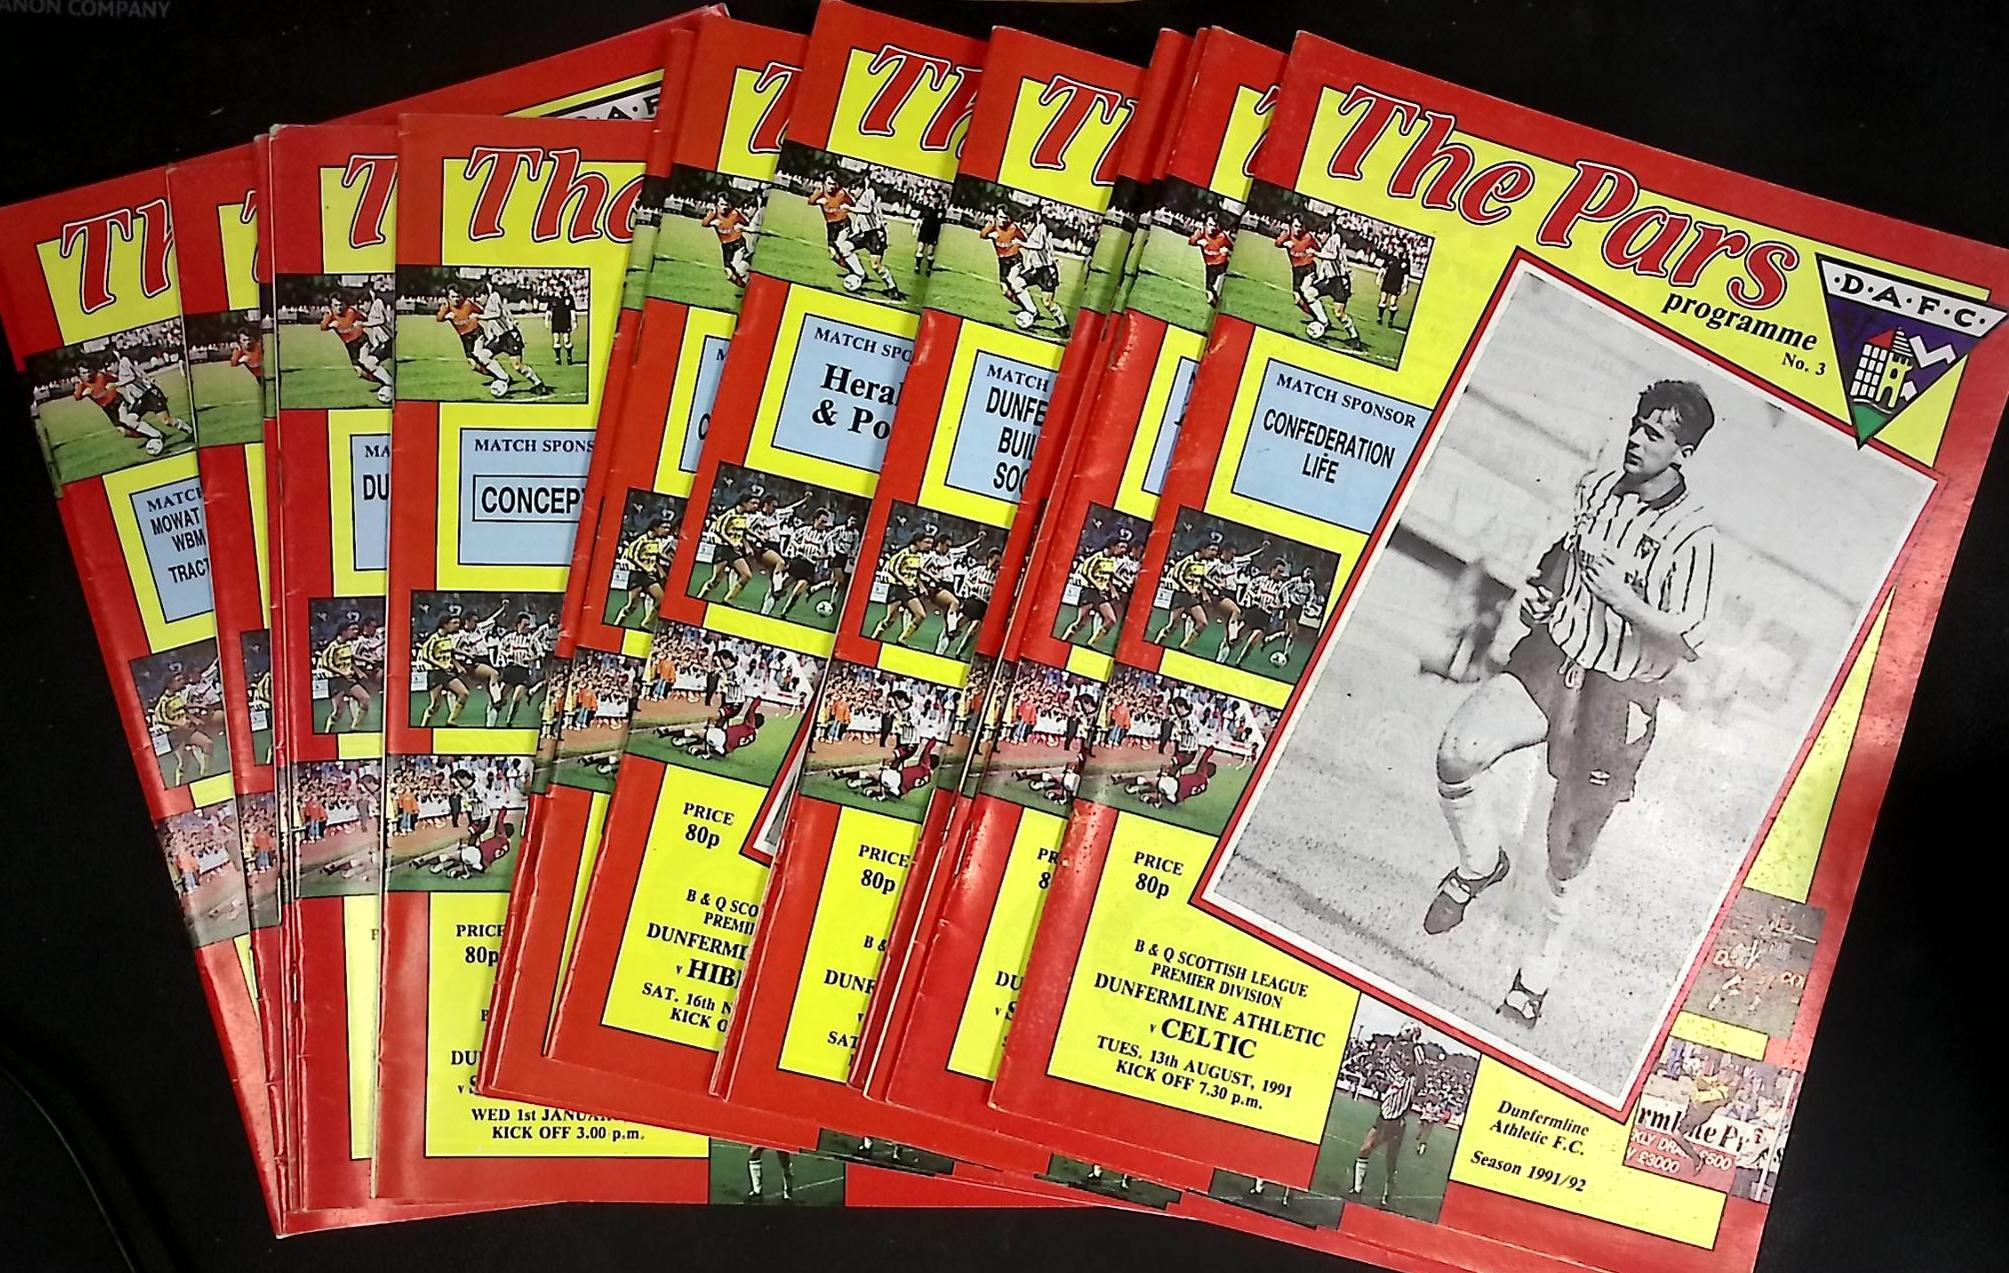 Dunfermline Athletic Football Programmes. The Pars. 1991-92 Season. 16 issues.